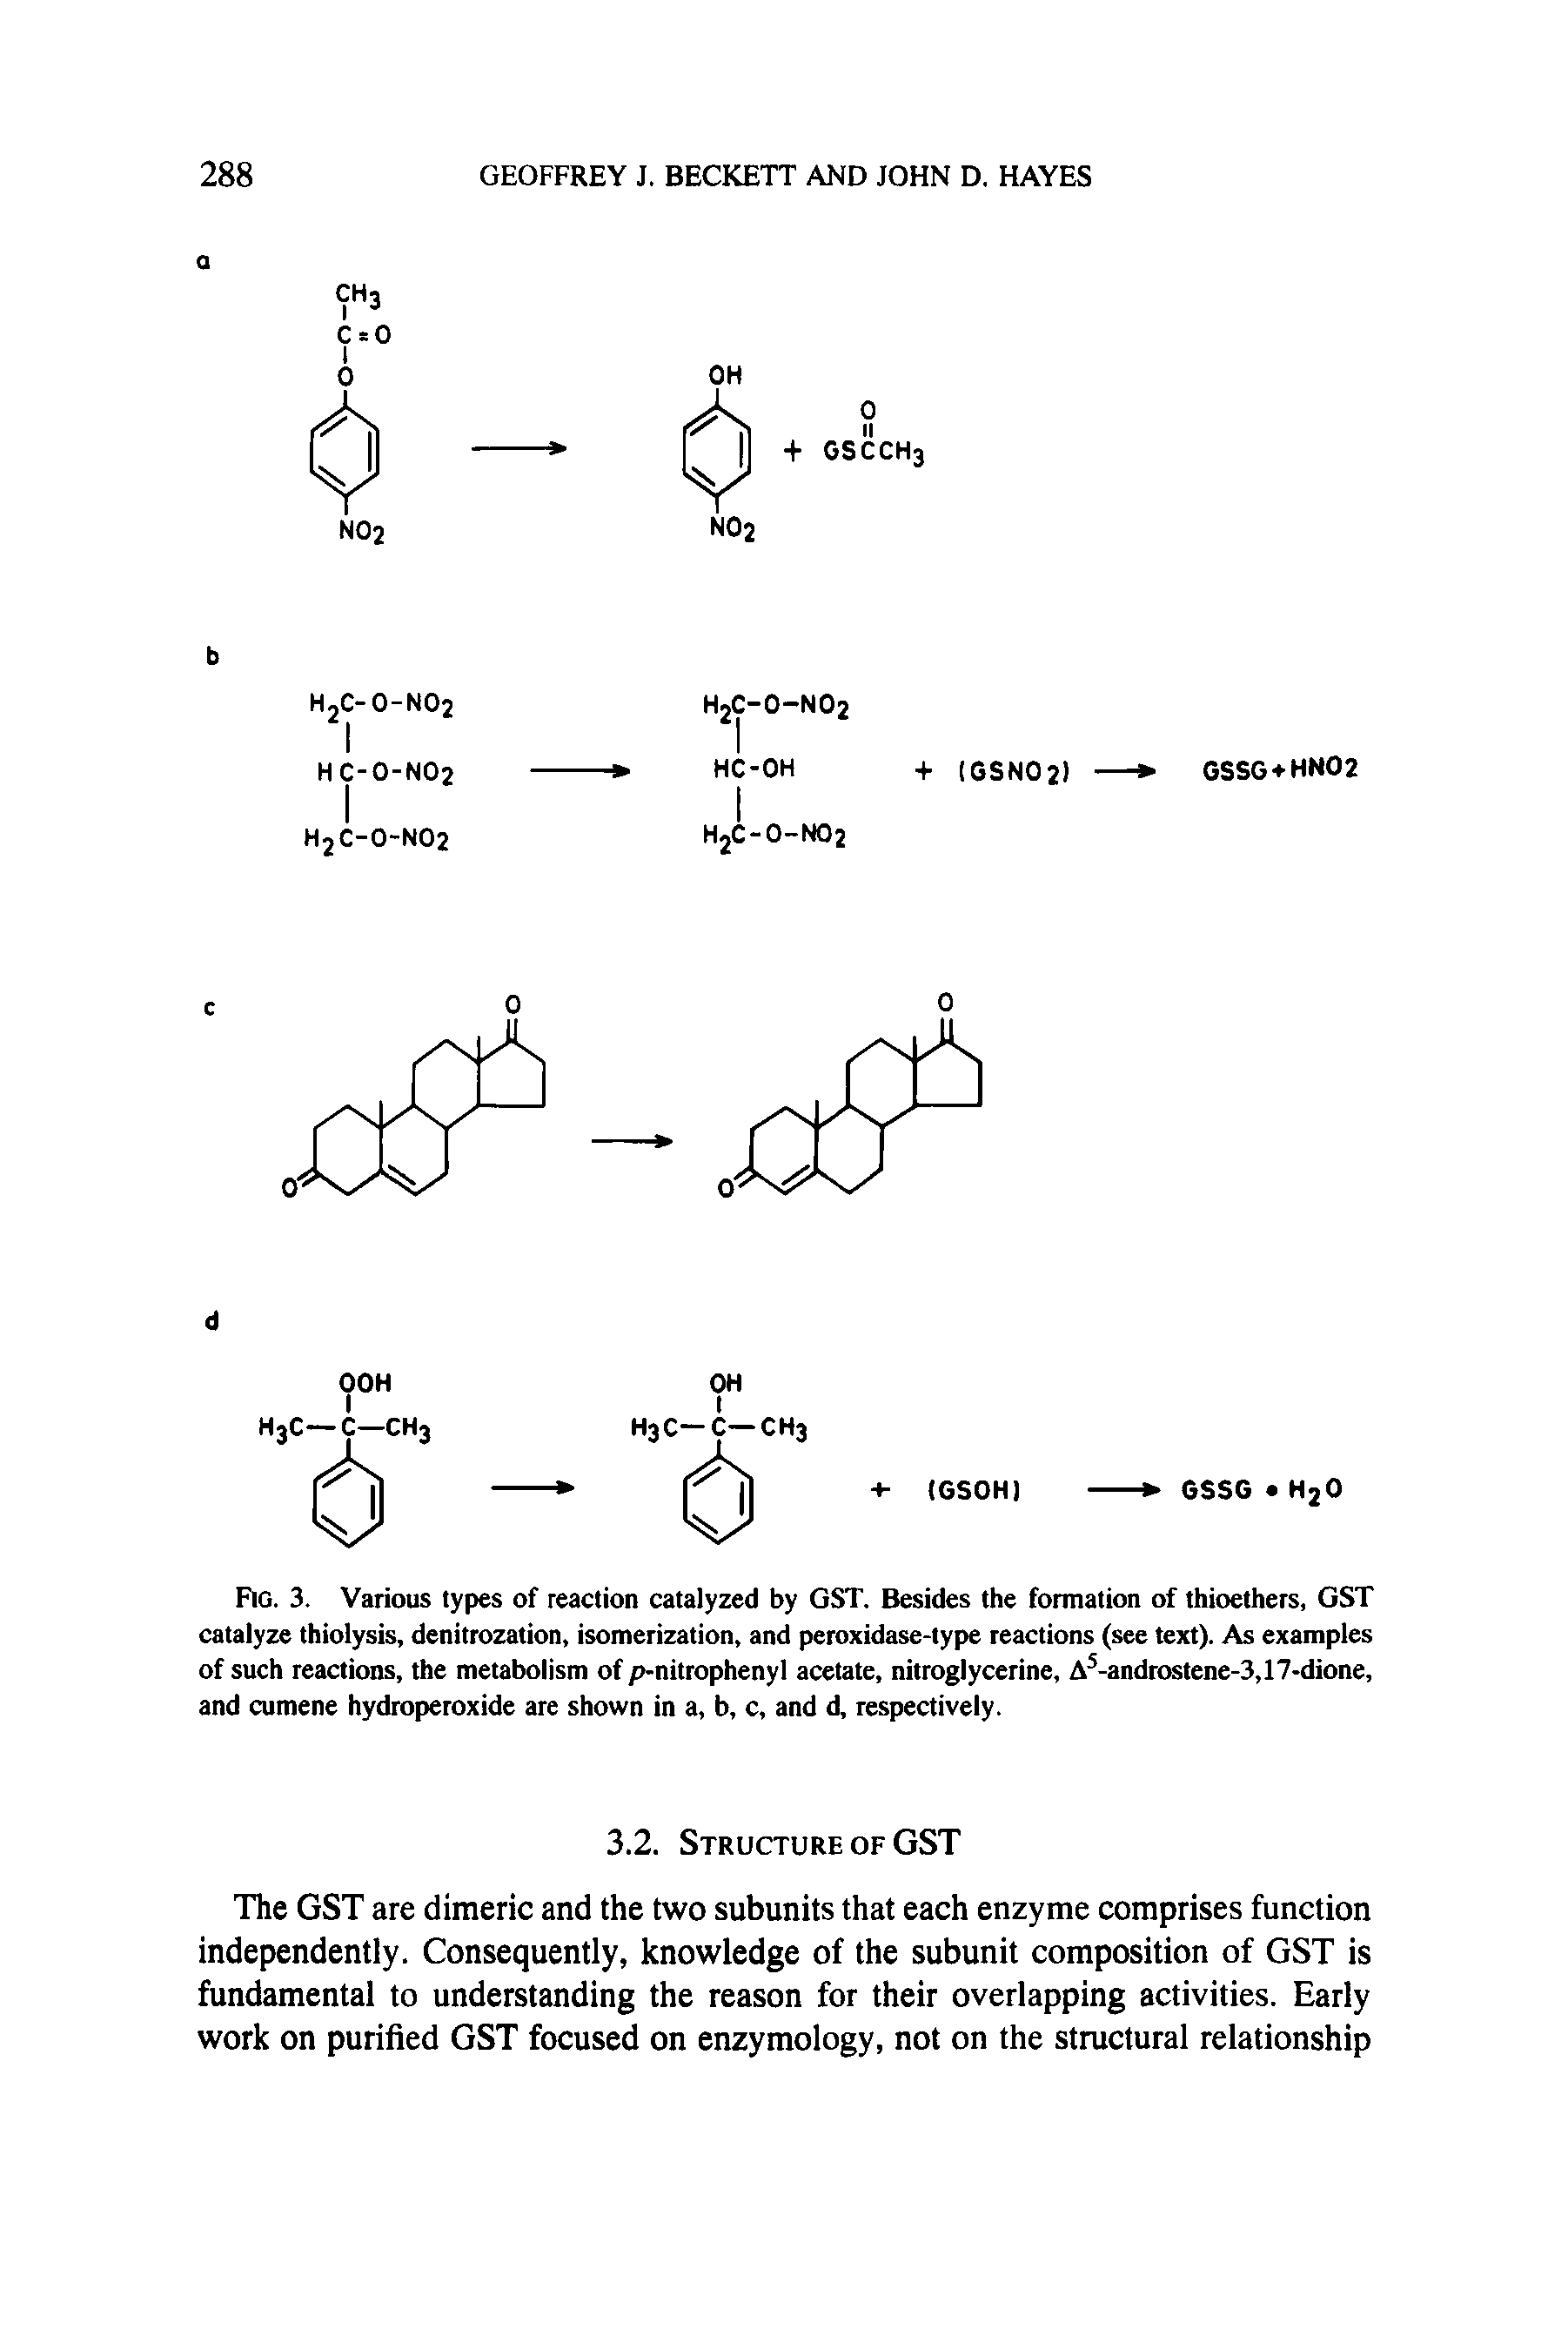 Fig. 3. Various types of reaction catalyzed by GST. Besides the formation of thioethers, GST catalyze thiolysis, denitrozation, isomerization, and peroxidase-type reactions (see text). As examples of such reactions, the metabolism of p-nitrophenyl acetate, nitroglycerine, A -androstene-3,17-dione, and cumene hydroperoxide are shown in a, b, c, and d, respectively.